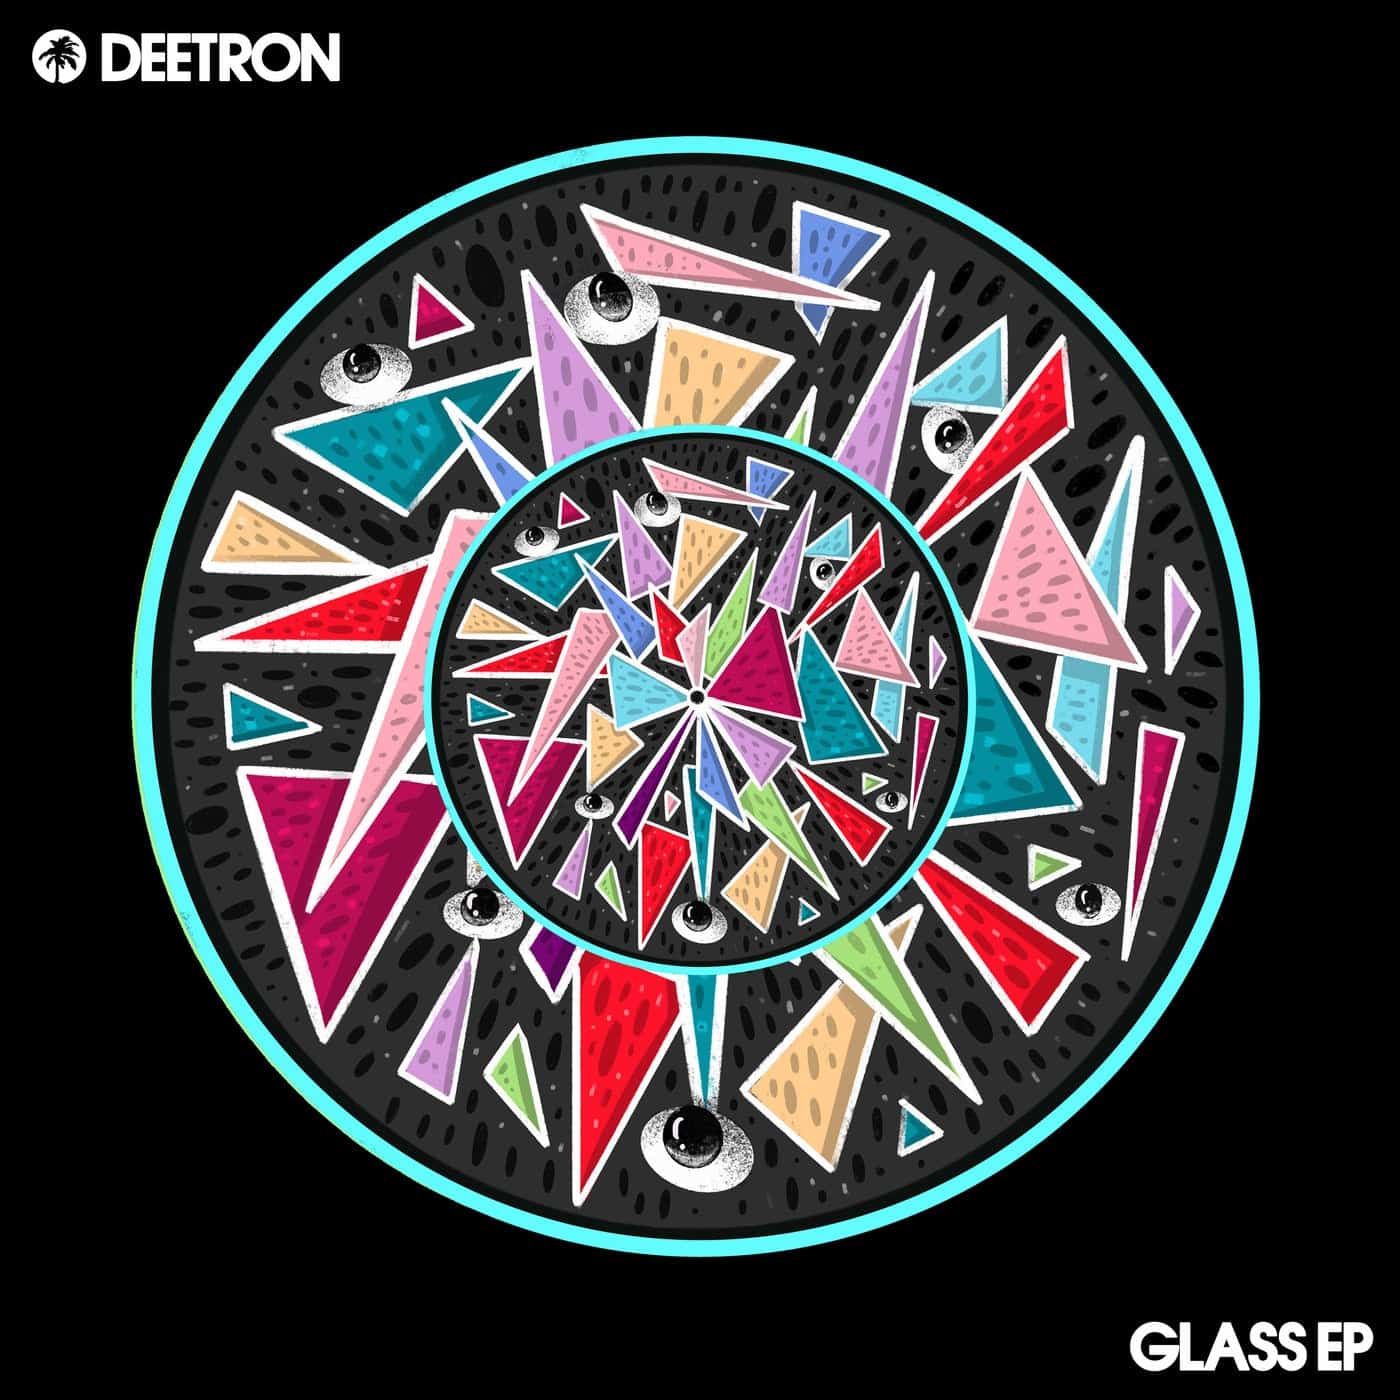 image cover: Deetron - Glass EP / HOTC188